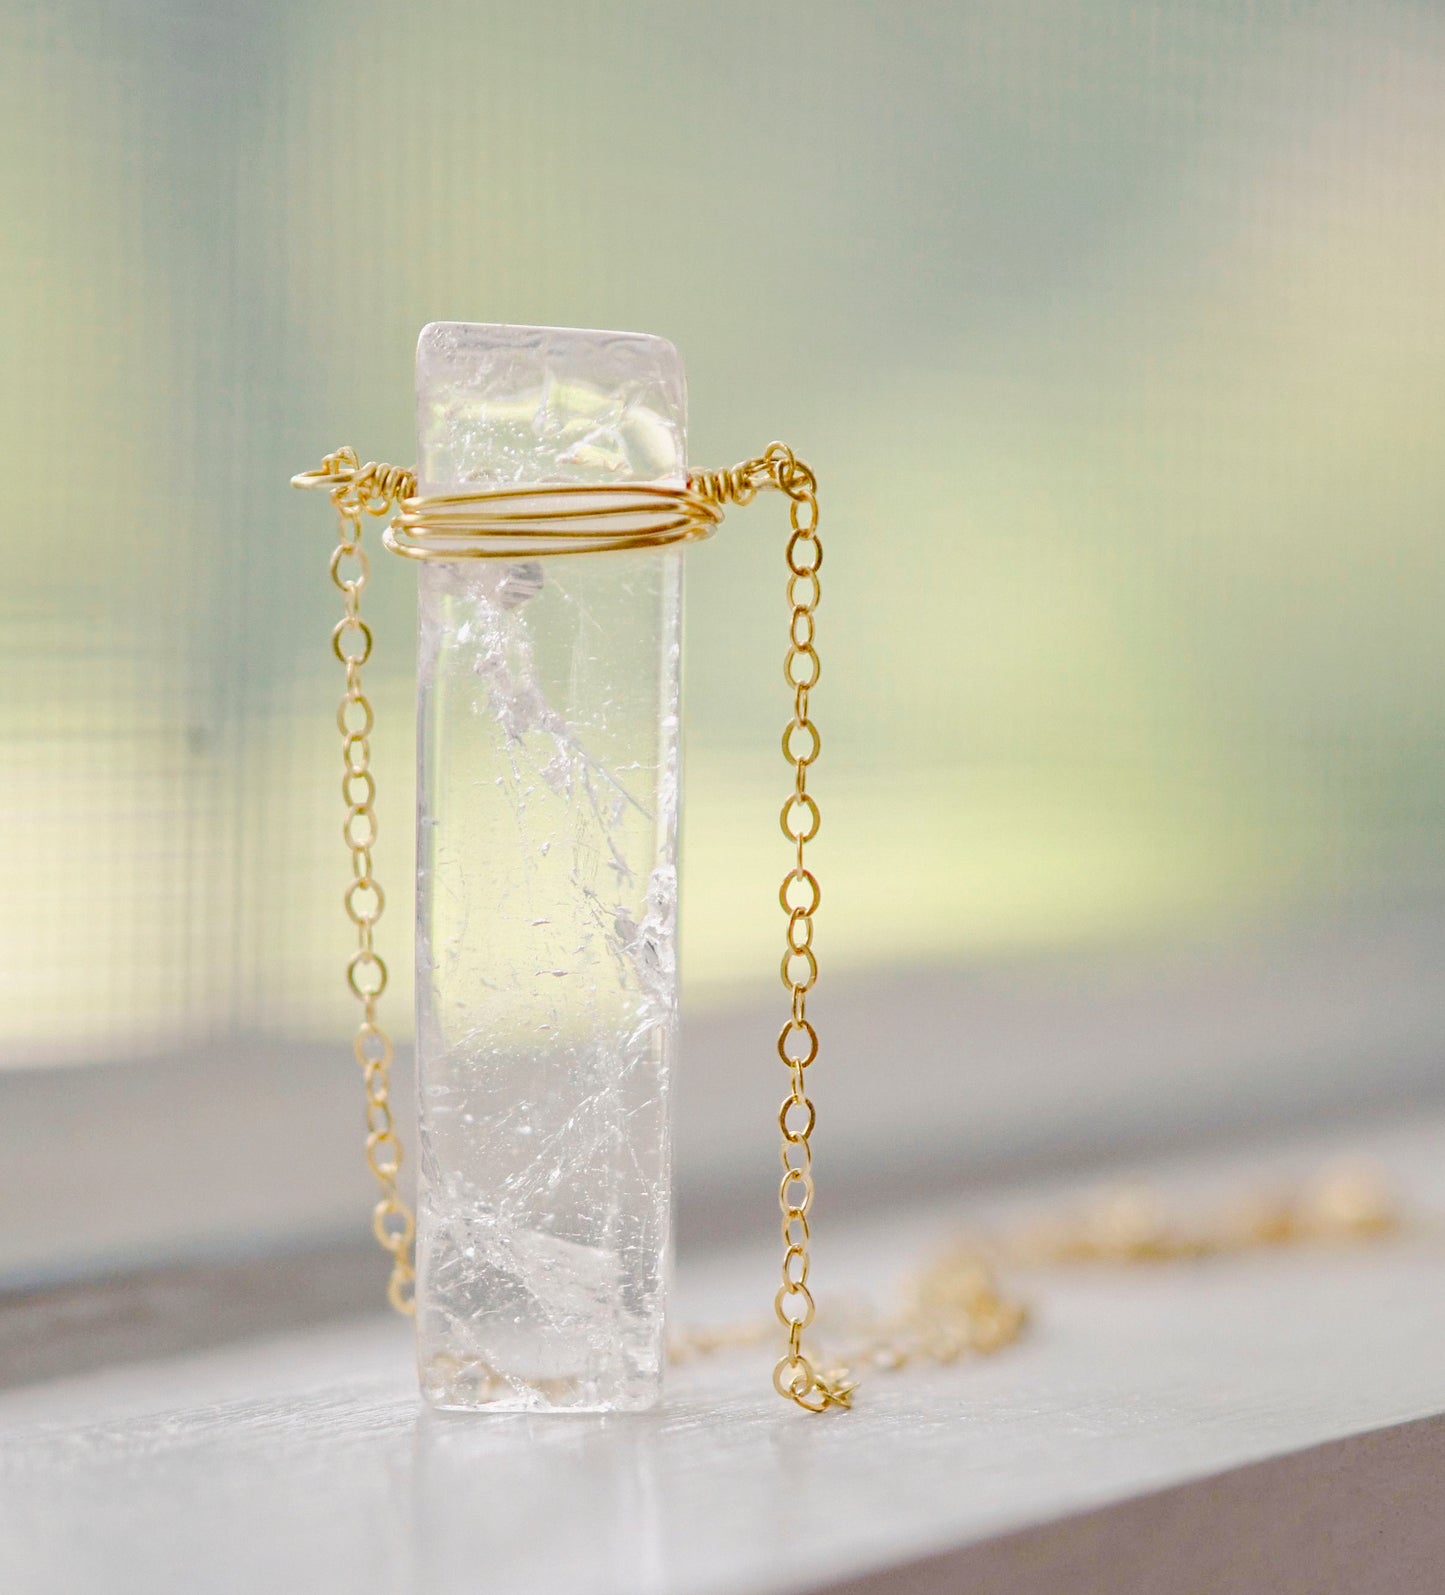 Rectangular shaped natural clear crystal Quartz gemstone set into a 14k gold filled chain. 